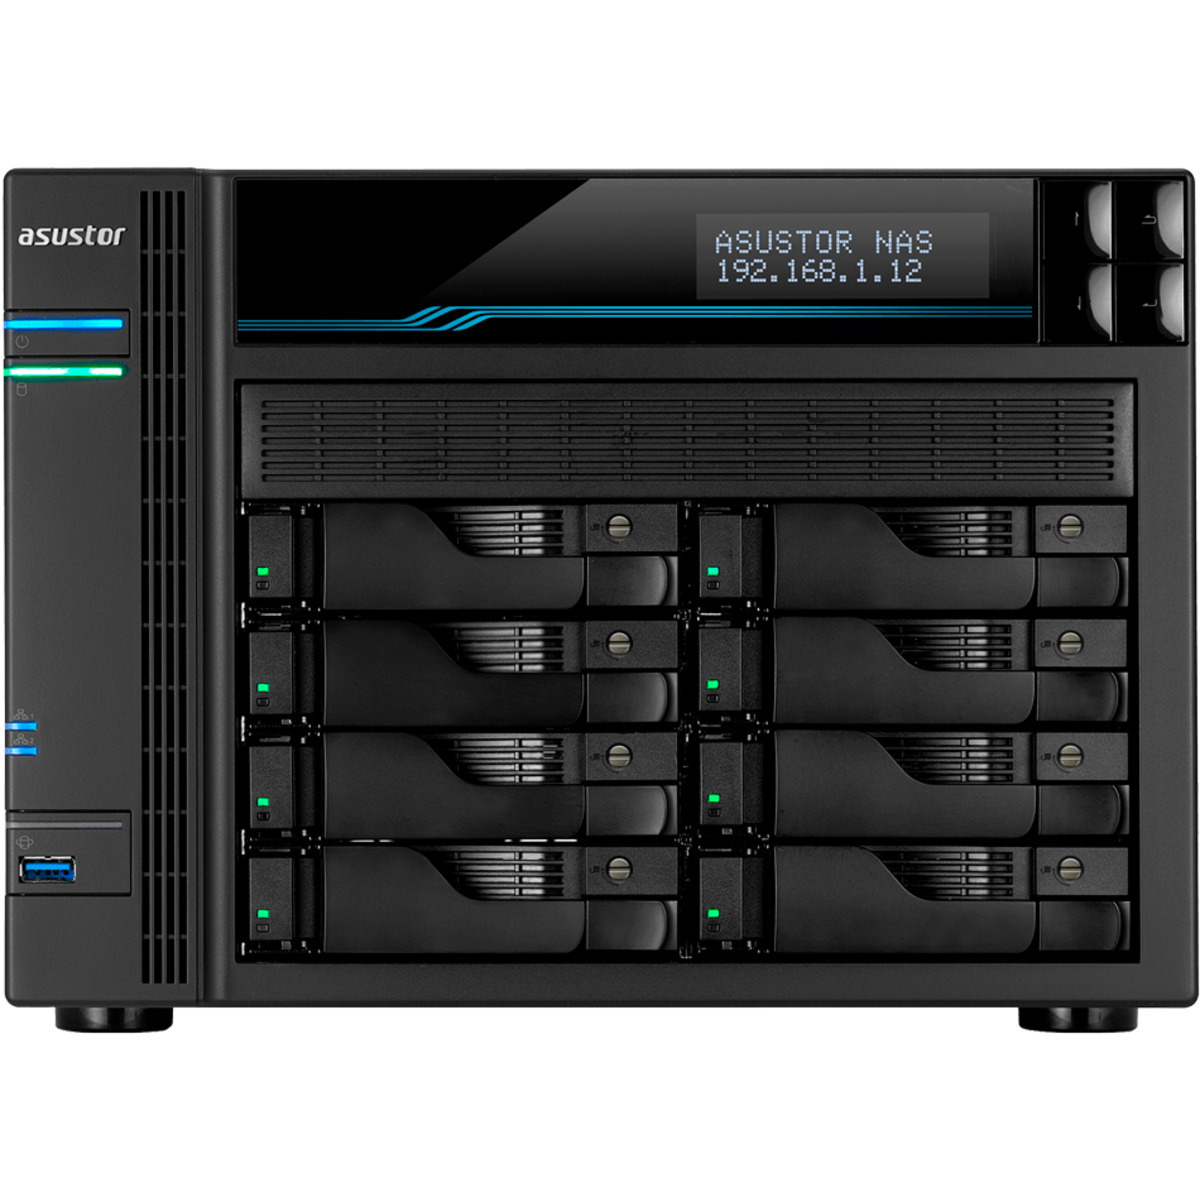 ASUSTOR AS6508T Lockerstor 8 64tb 8-Bay Desktop Multimedia / Power User / Business NAS - Network Attached Storage Device 8x8tb Toshiba Enterprise Capacity MG08ADA800E 3.5 7200rpm SATA 6Gb/s HDD ENTERPRISE Class Drives Installed - Burn-In Tested - ON SALE - FREE RAM UPGRADE AS6508T Lockerstor 8